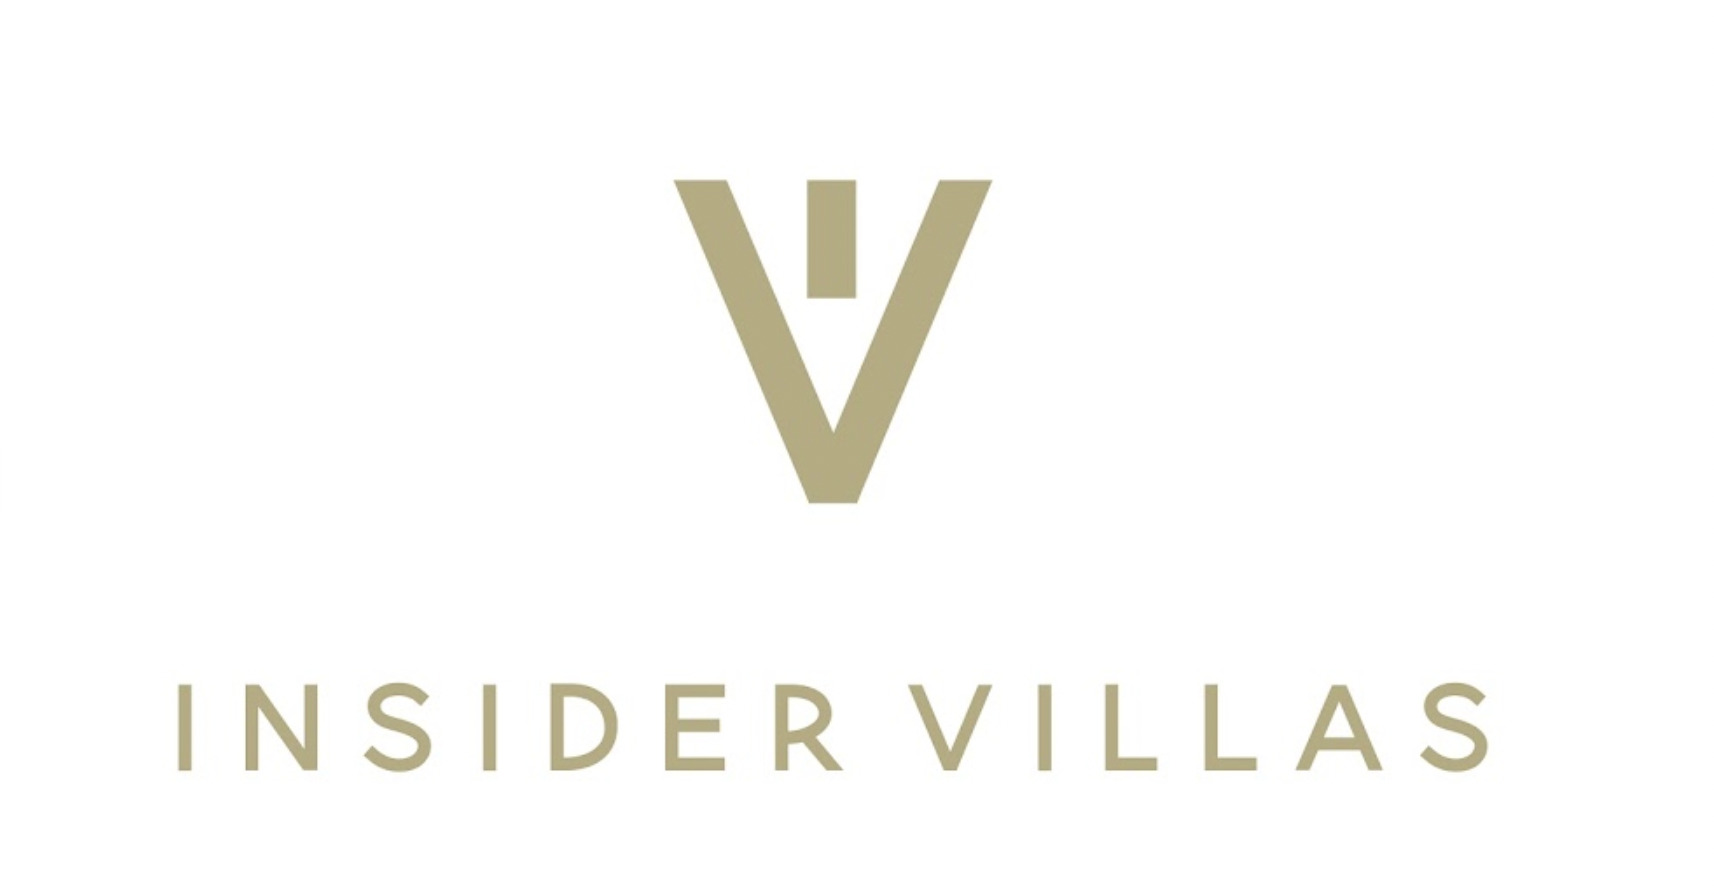 Insider Villas Launch Selection Of Luxury Villa Rentals And Experiences Throughout Mallorca, Ibiza, Italy, Seychelles, Croatia, And Beyond